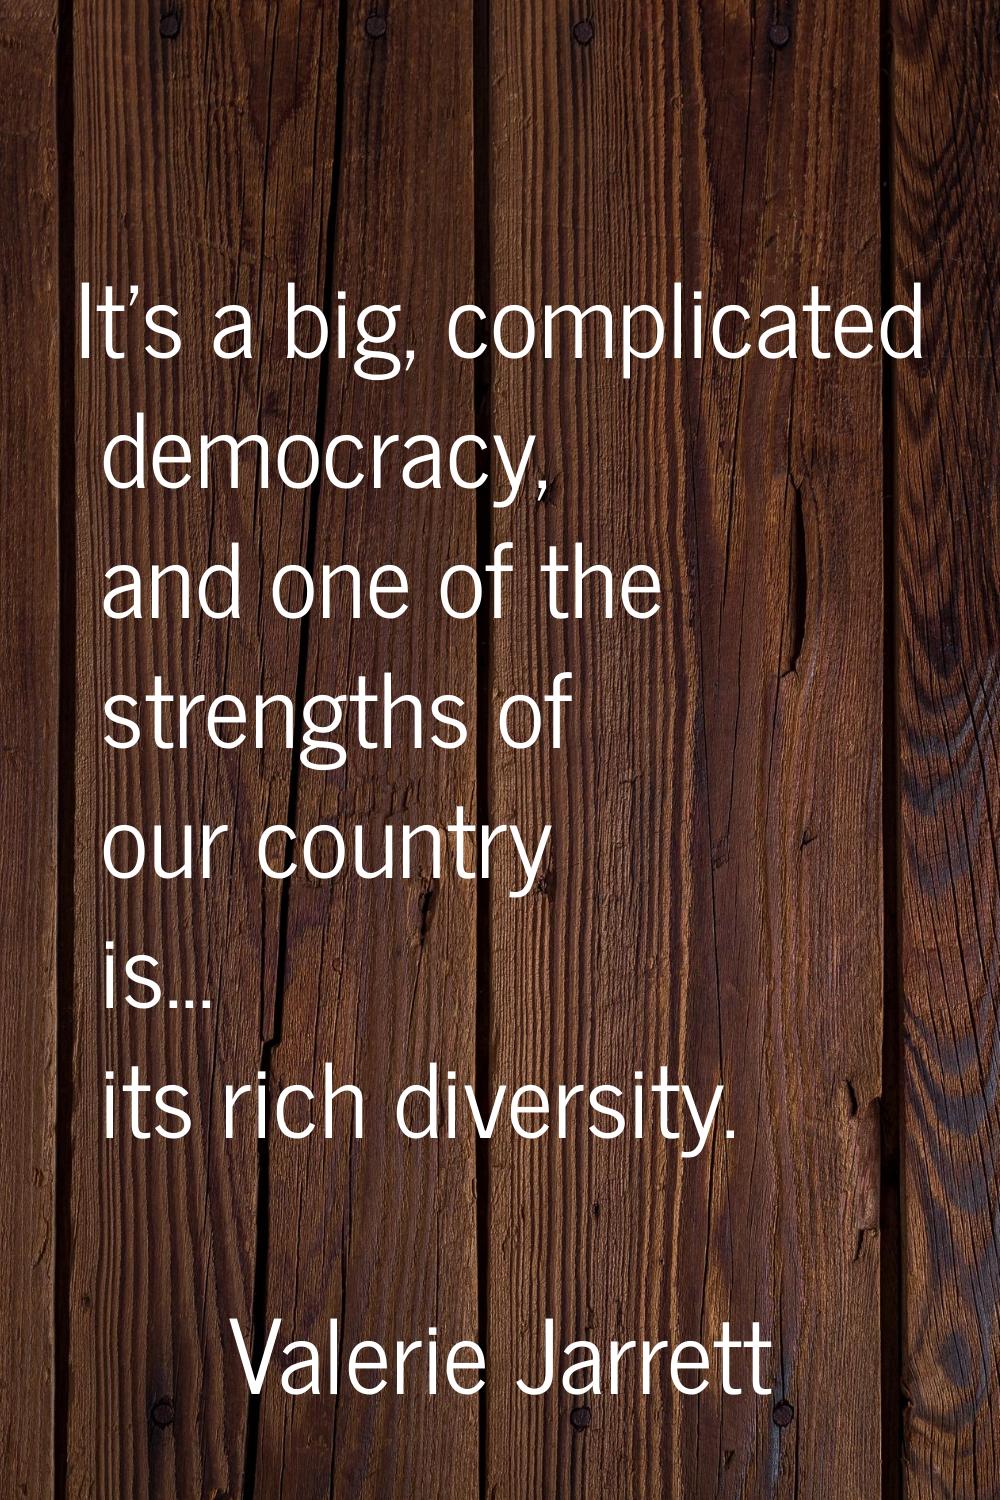 It's a big, complicated democracy, and one of the strengths of our country is... its rich diversity